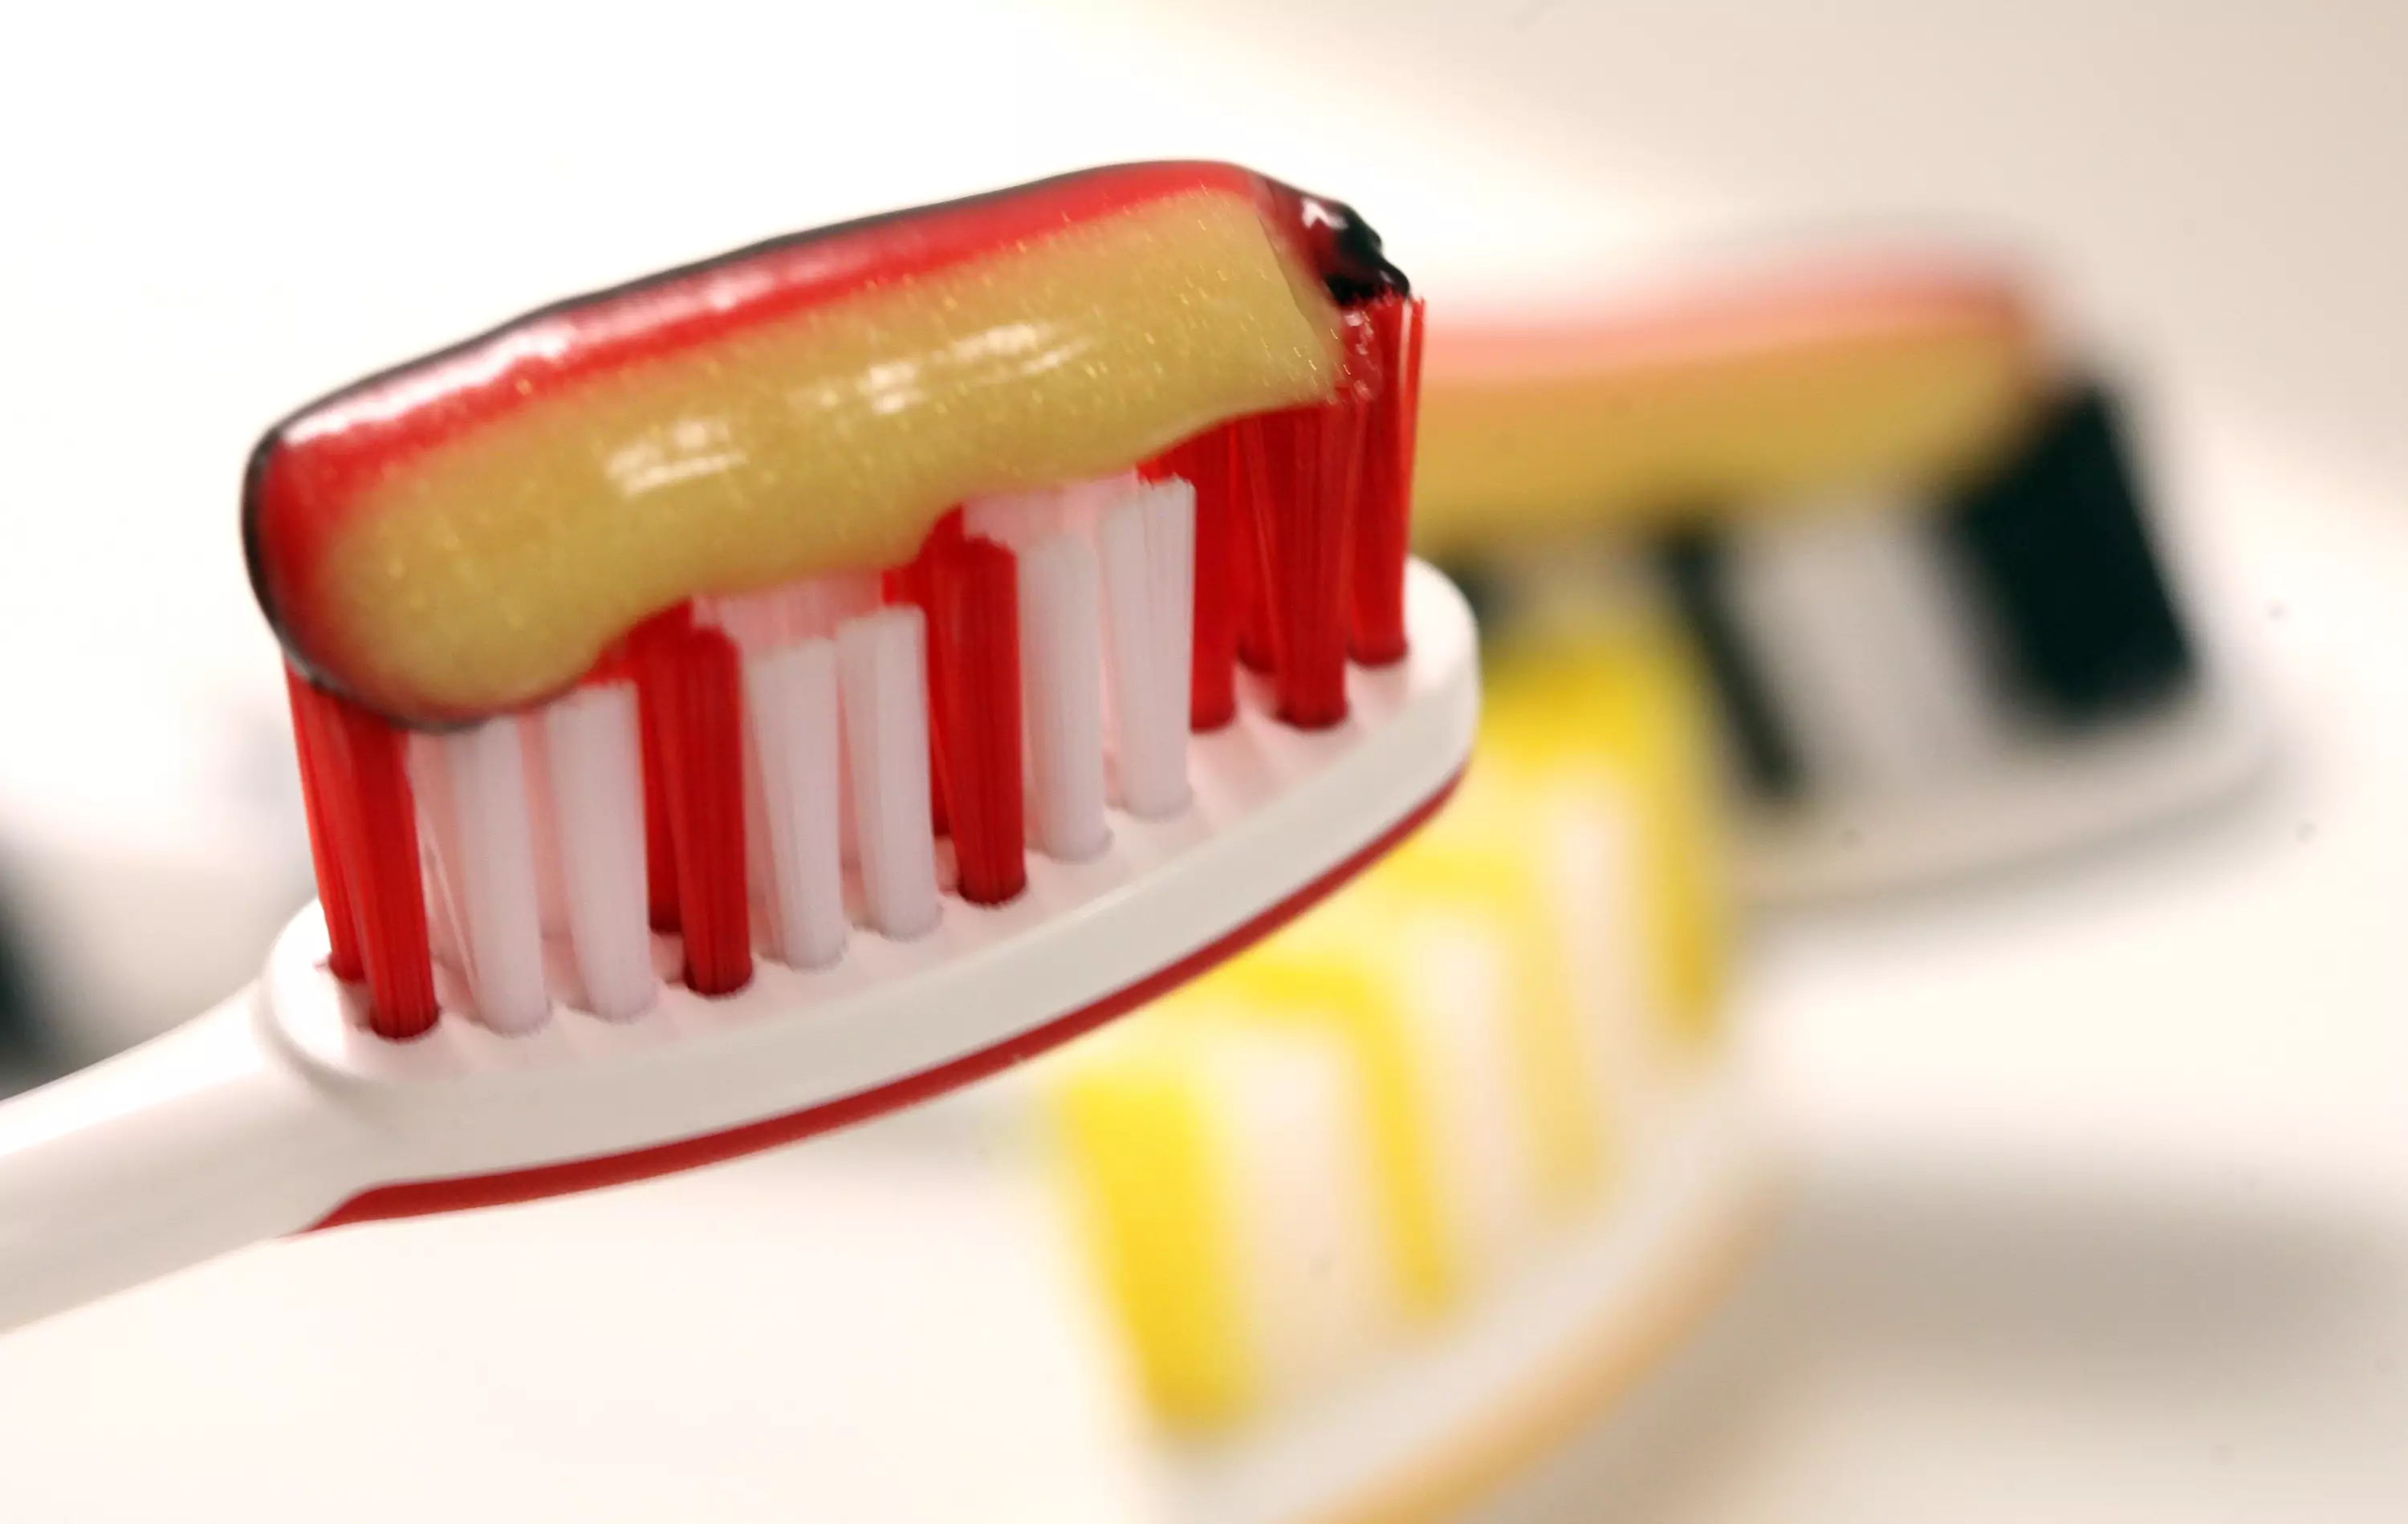 The study found that a third of Brits forget to brush their teeth.